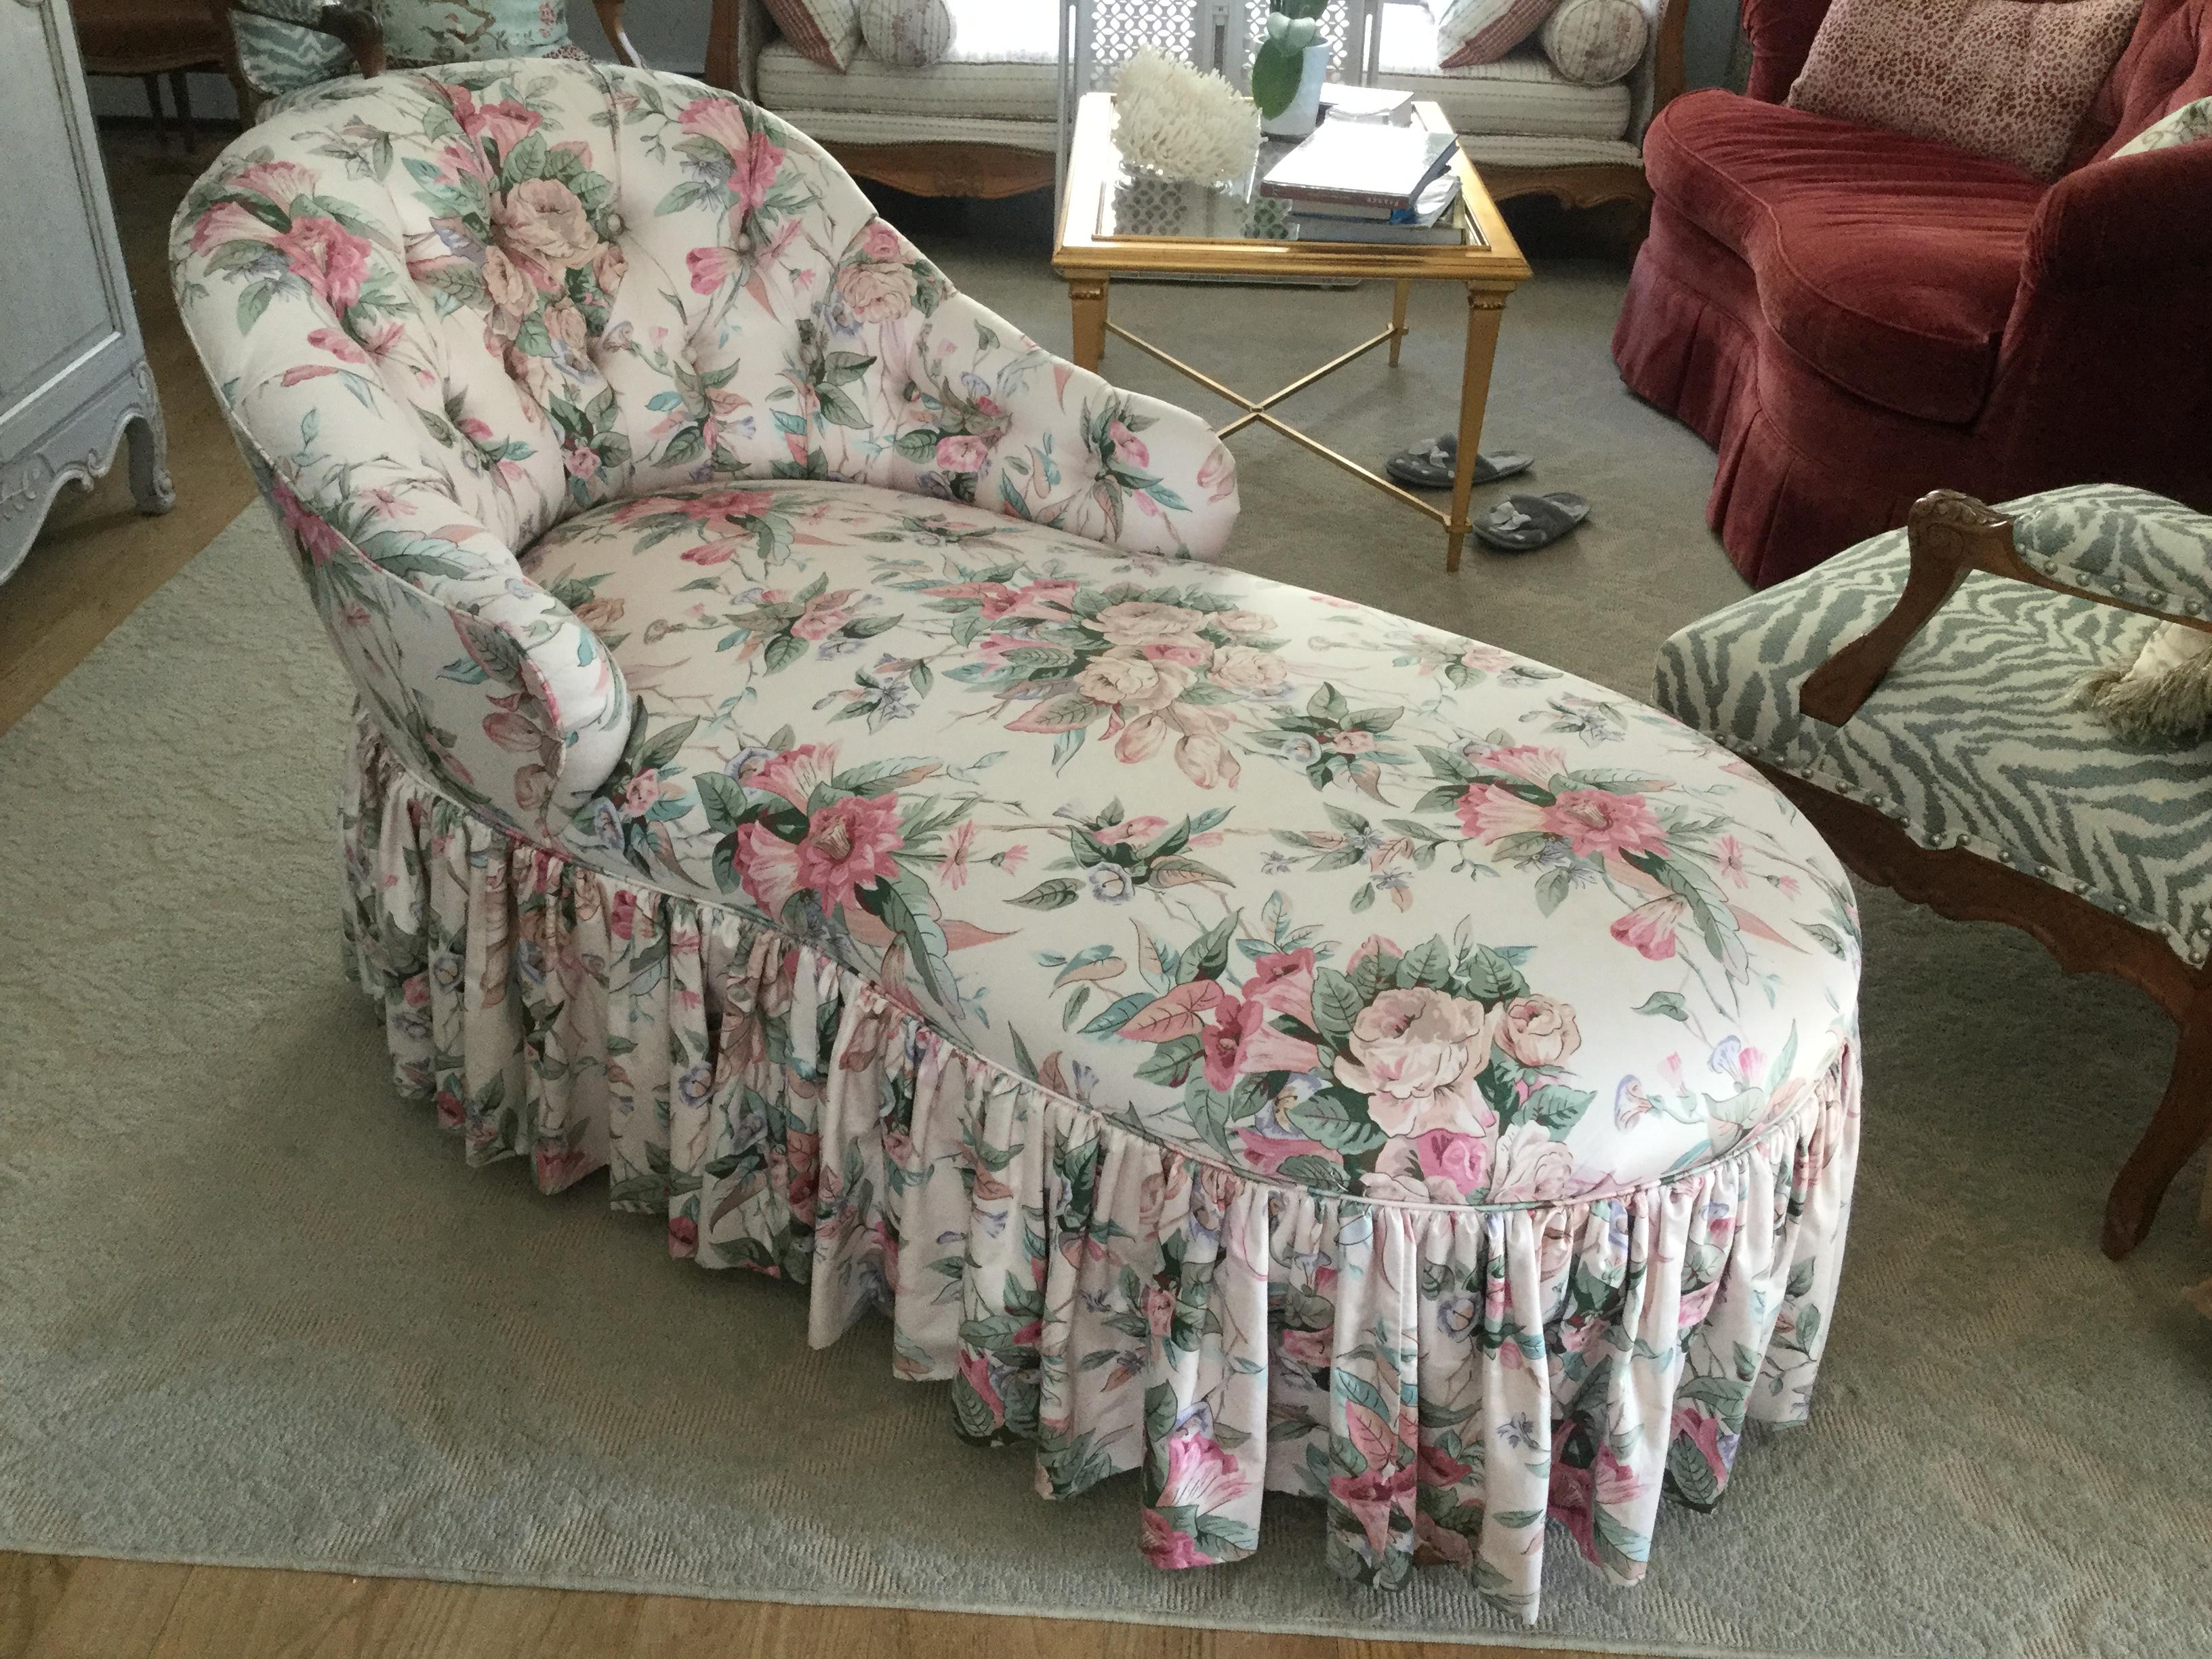 floral chaise lounge